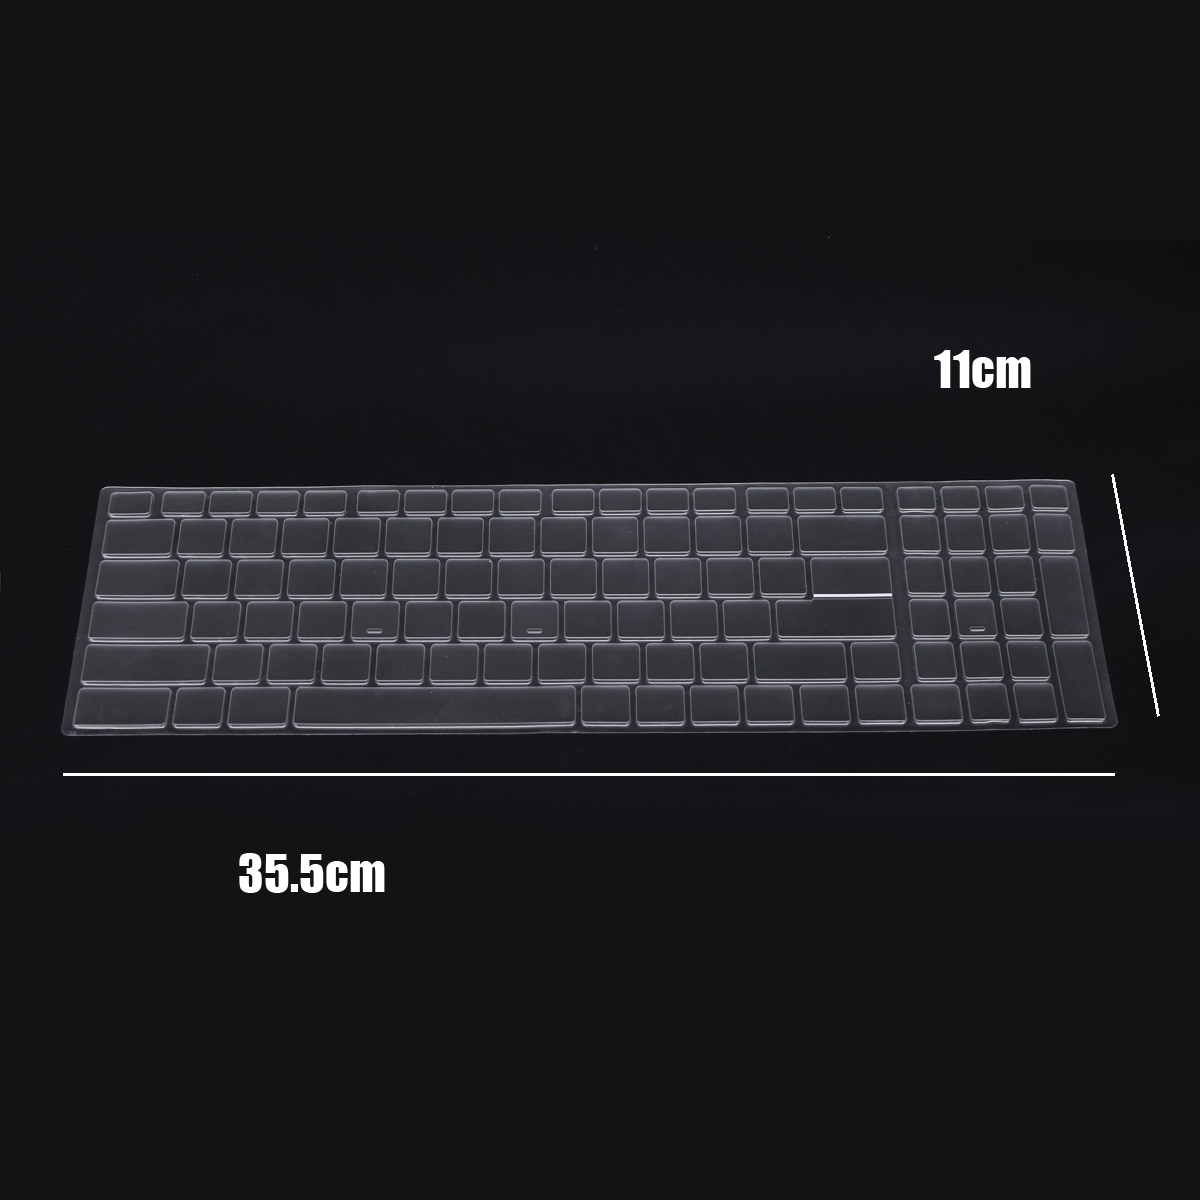 TPU-Keyboard-Cover-Skin-For-MSI-GE62-GE72-GS60-GS70-GT72-GL62-PE60-GS63-GS63VR-Laptop-1302025